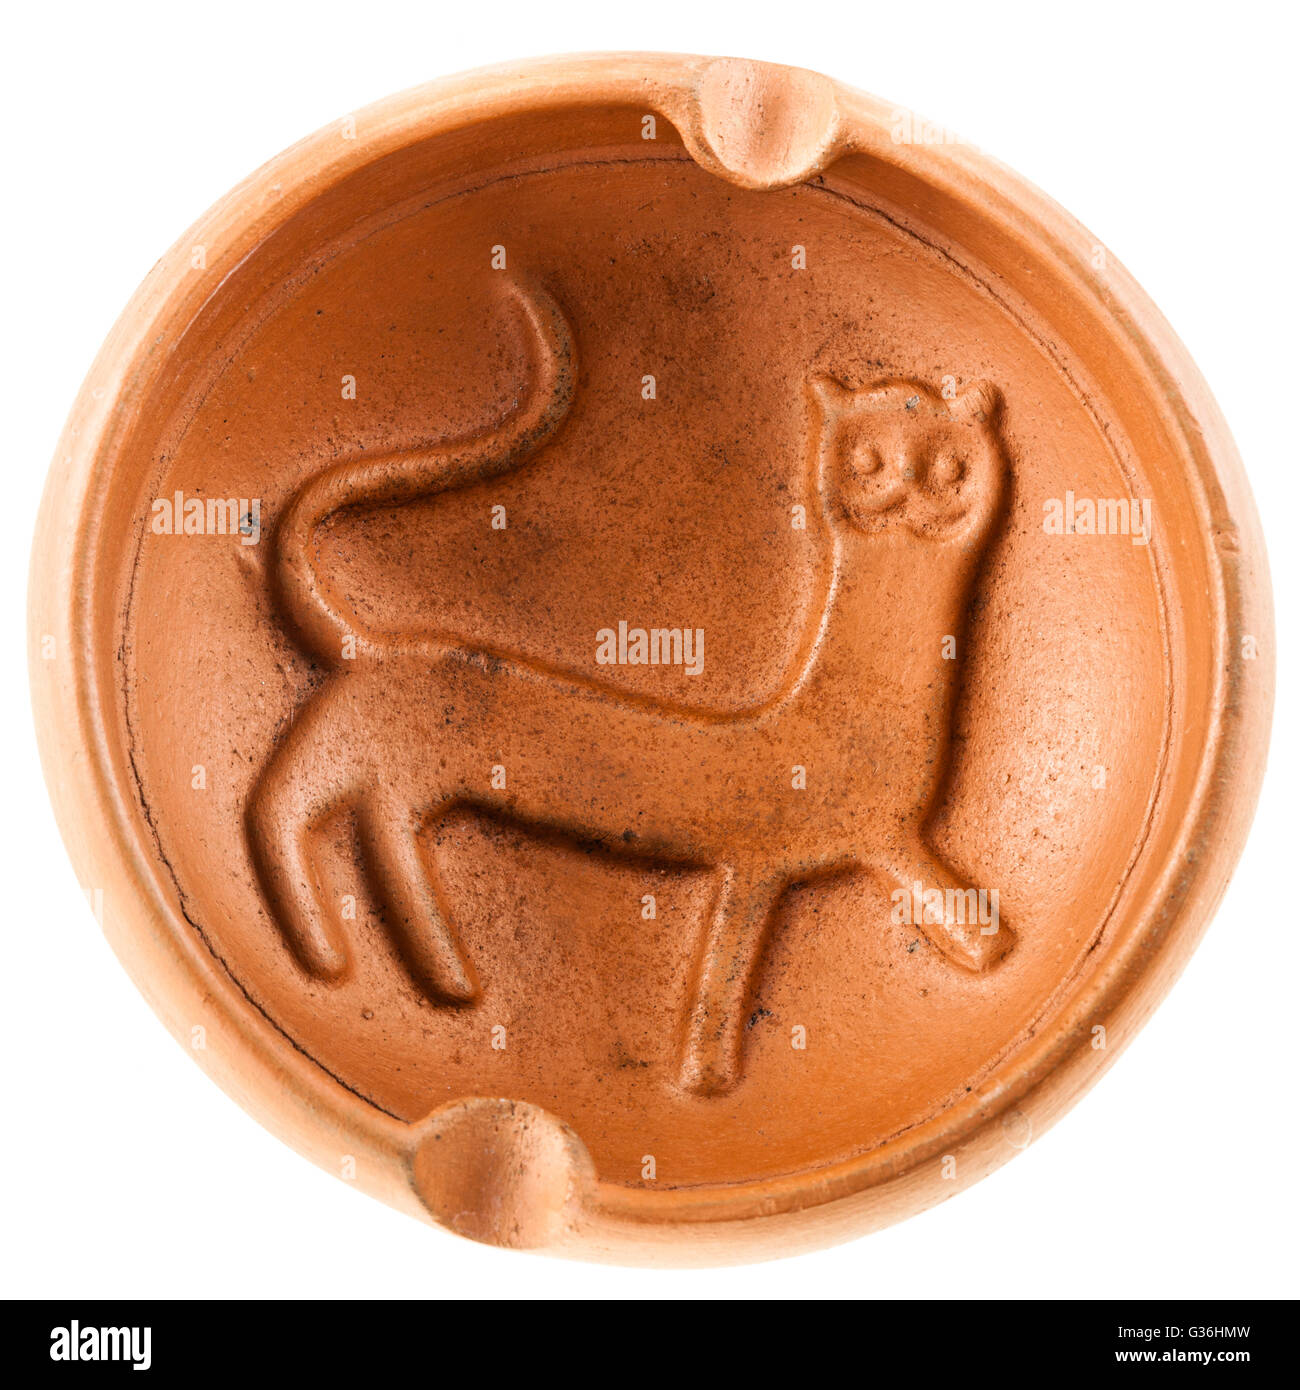 a clay ashtray with a cat figure engraved on it isolated over a white background Stock Photo